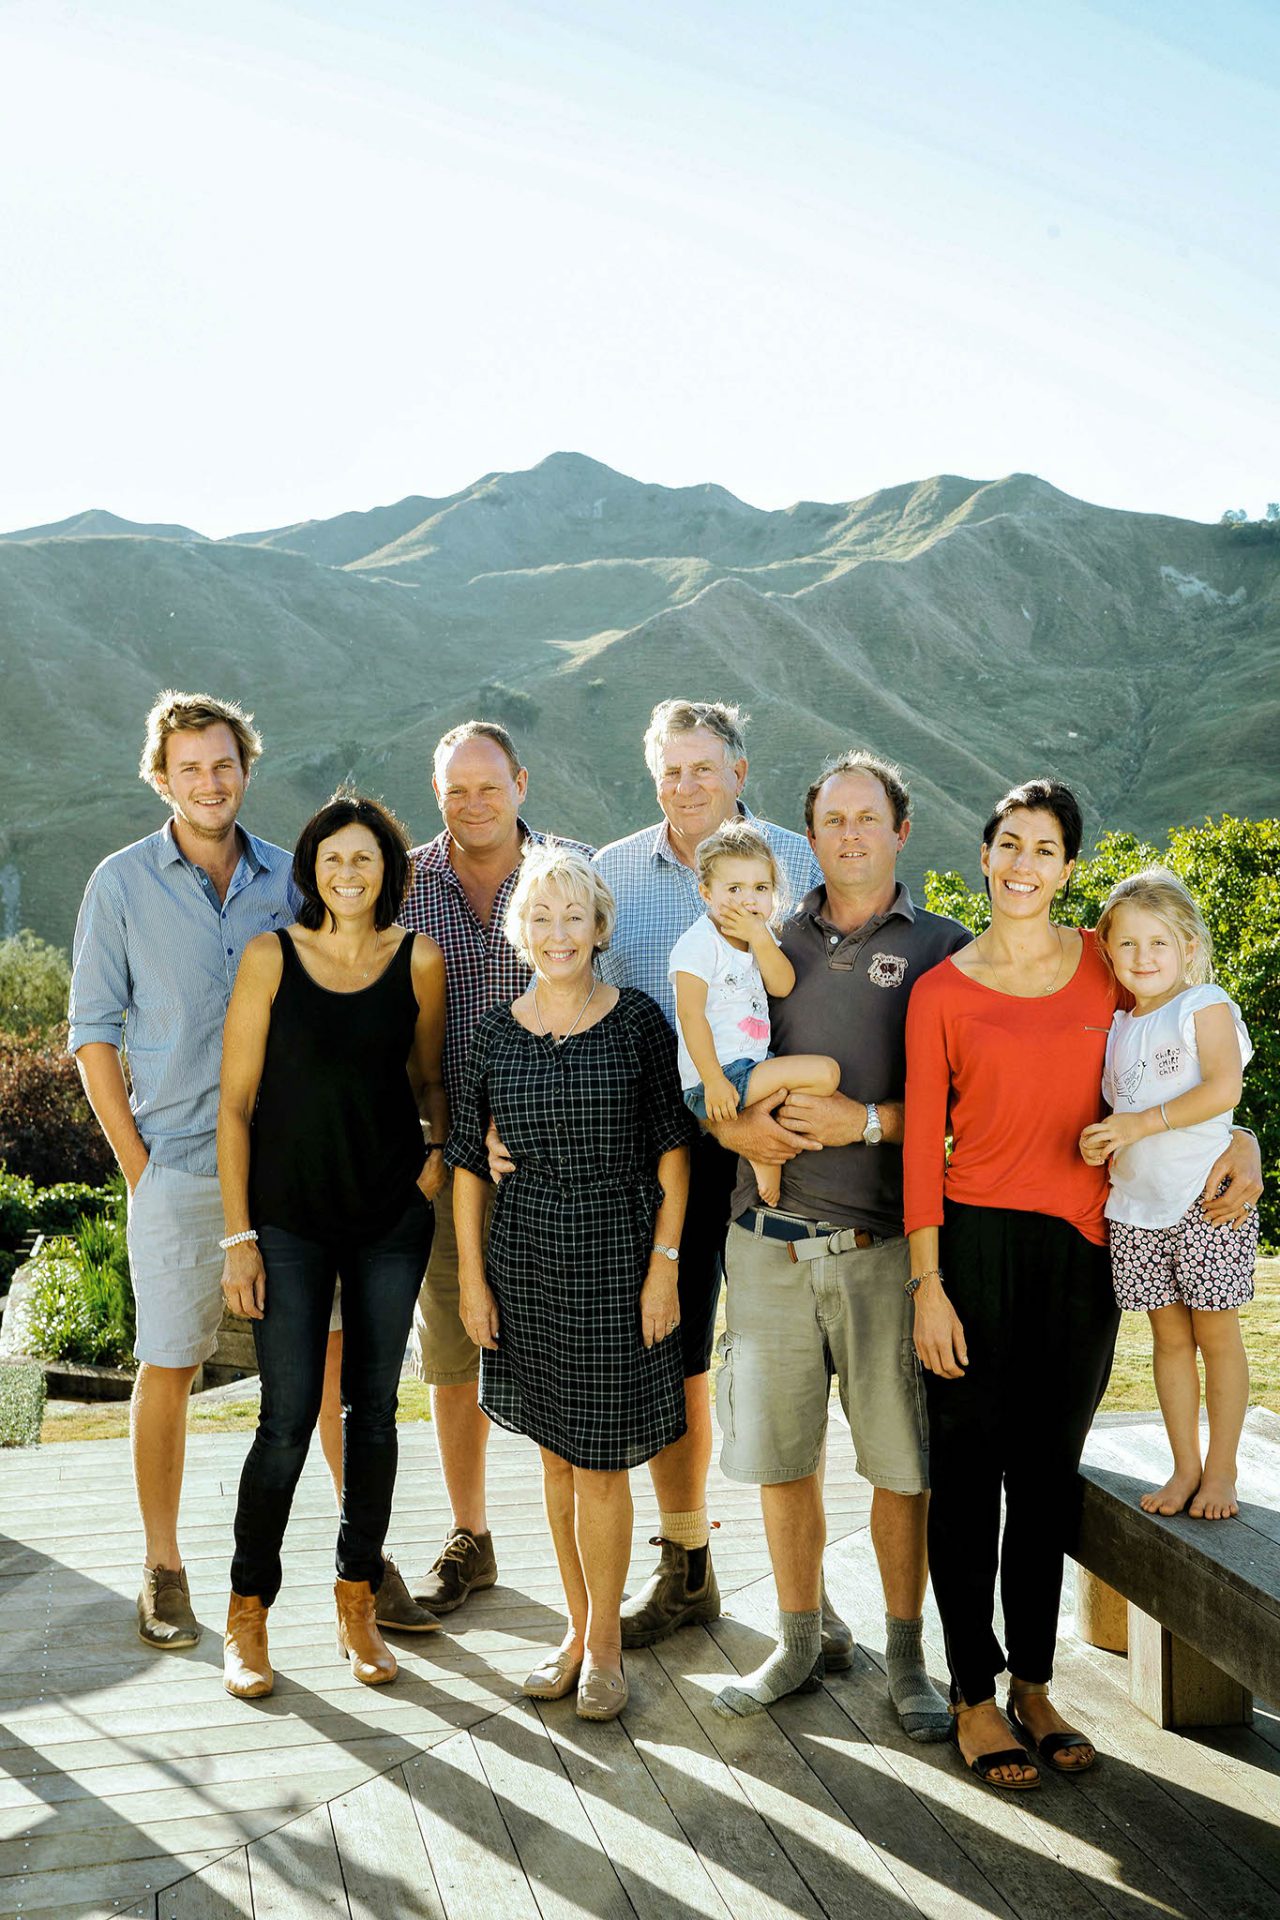 The Hurley Family, Siberia Station, Rangitikei. Beef Farm.
Mindfood Issue May 2014.